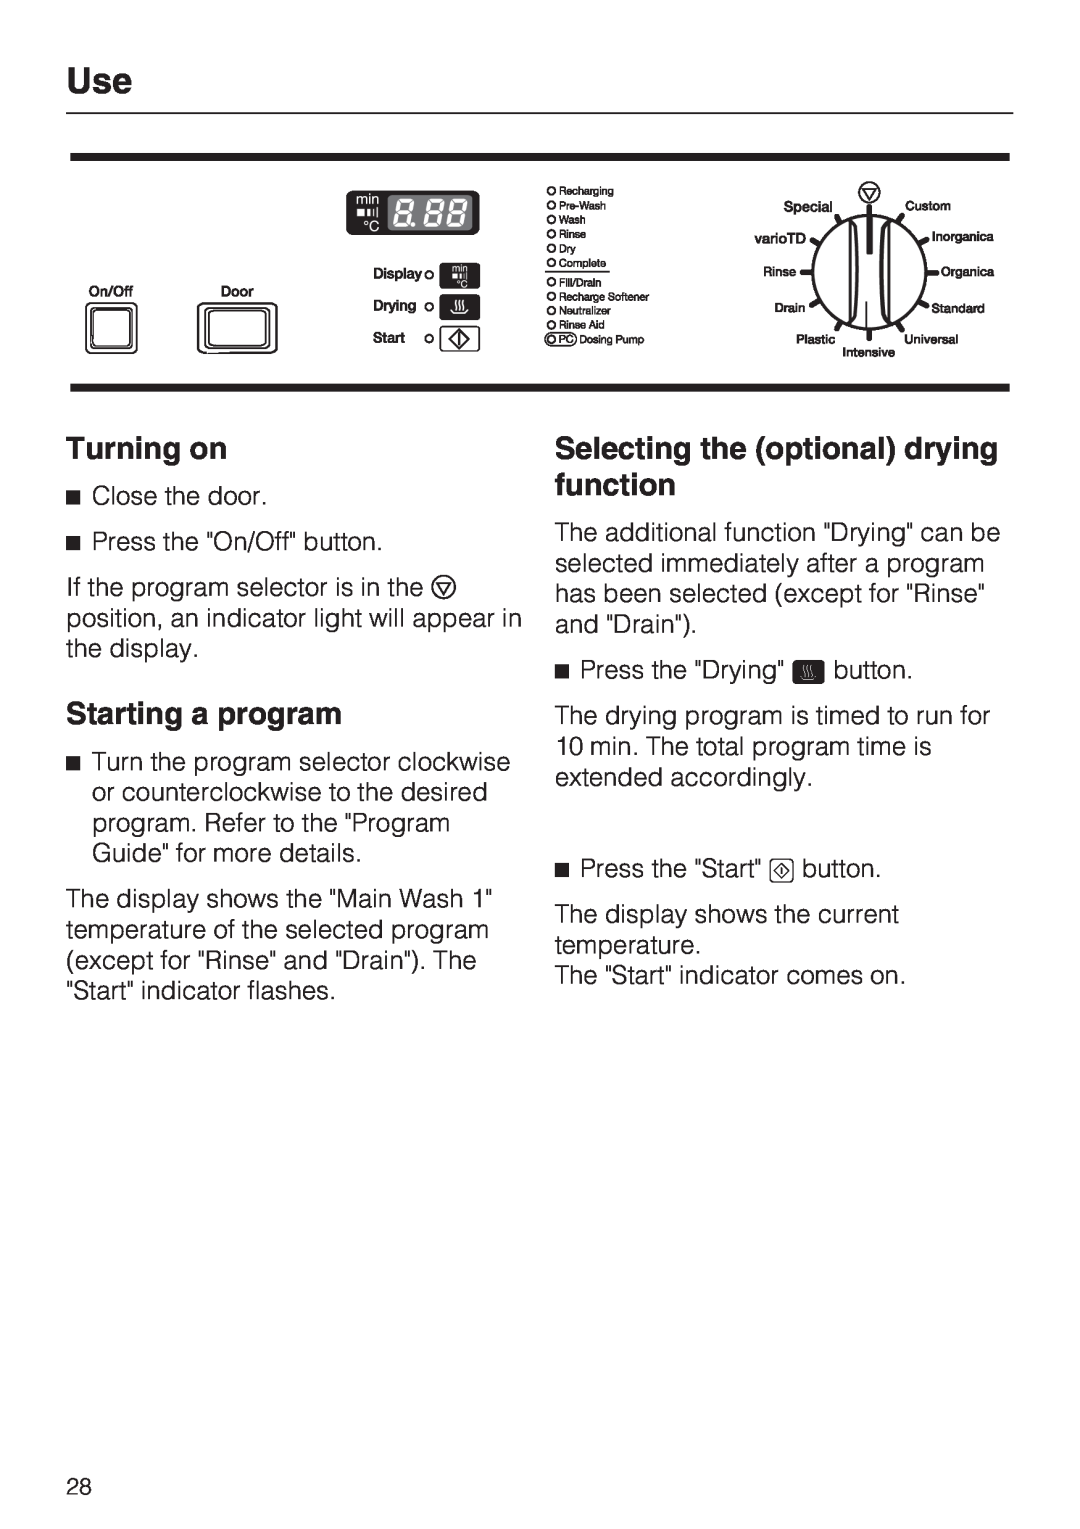 Miele G 7883 installation instructions Turning on, Starting a program, Selecting the optional drying function 